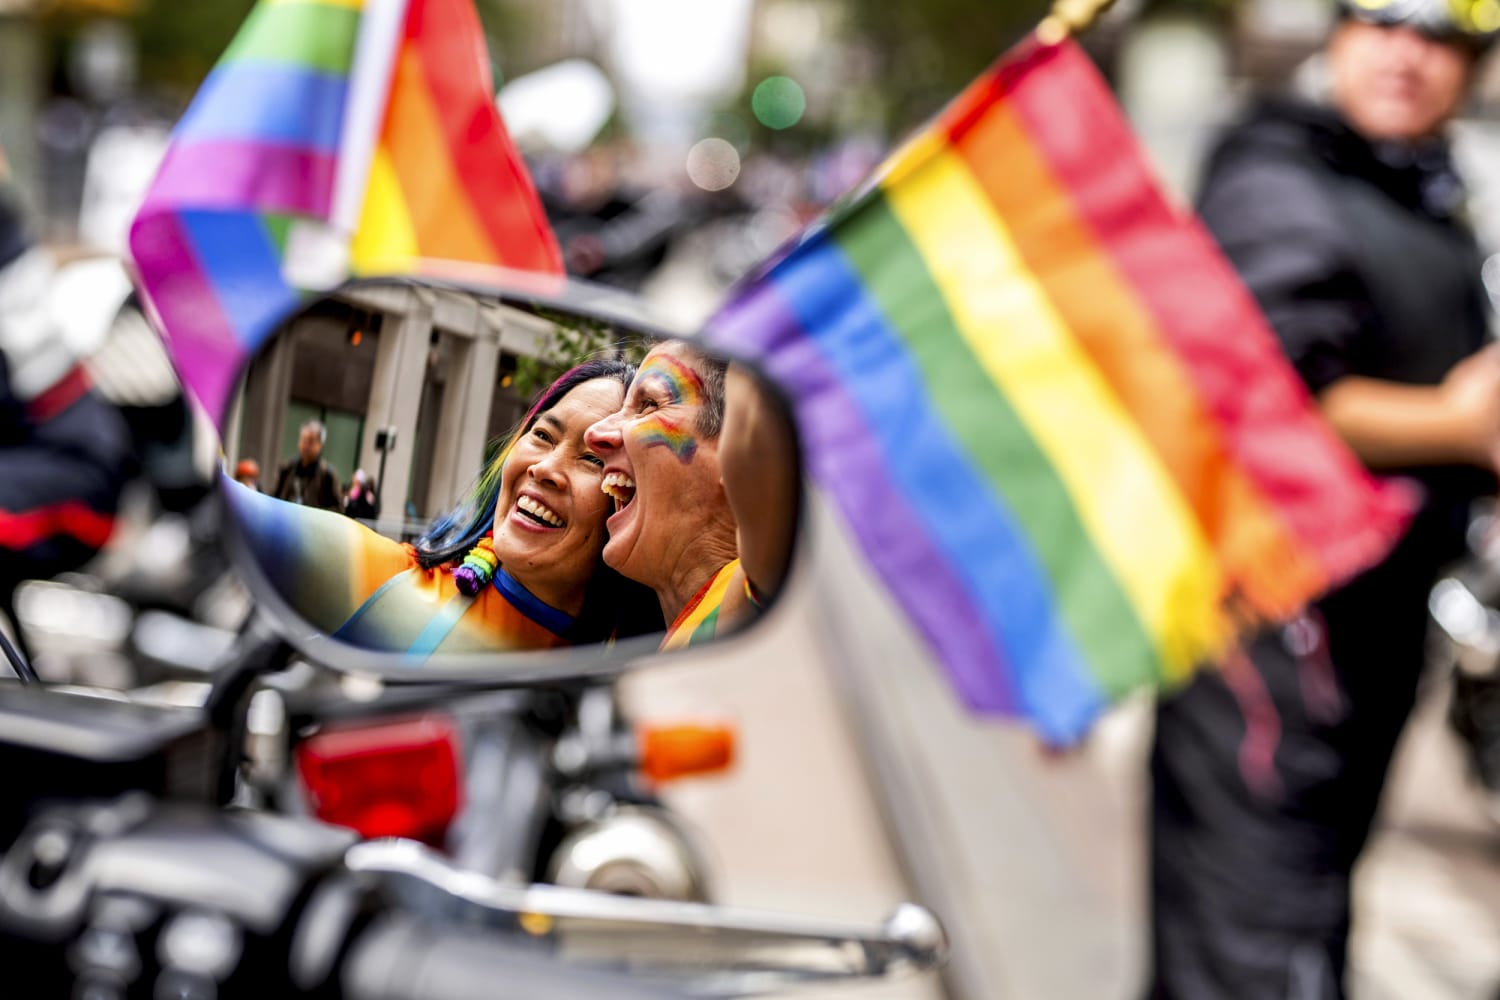 Party and protest mix as LGBTQ pride parades roll from coast to coast